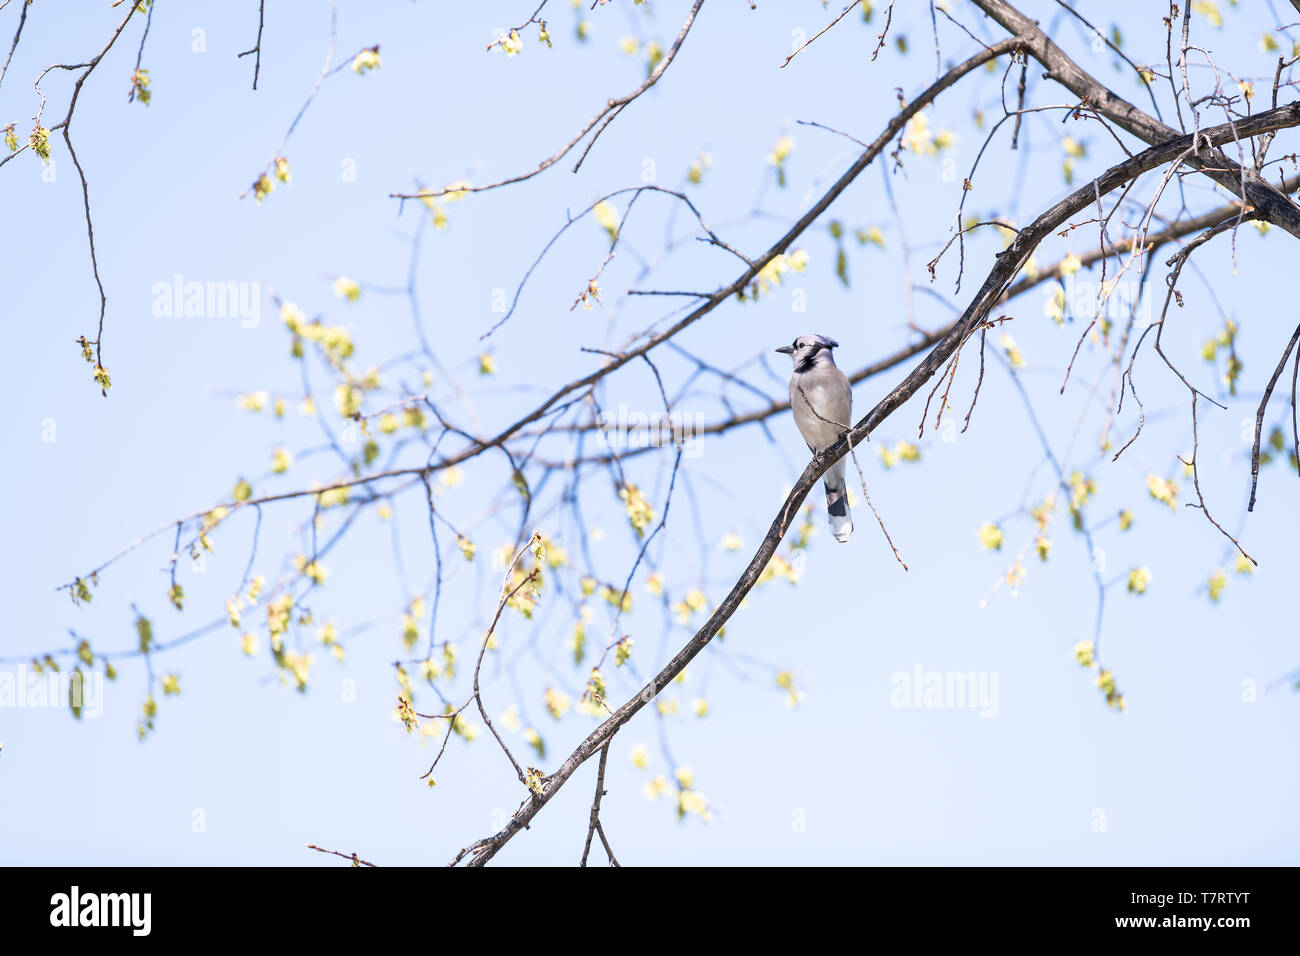 One blue jay bird sitting perched on top of sakura, cherry blossom tree branch by flowers in Washington, DC isolated against blue sky Stock Photo